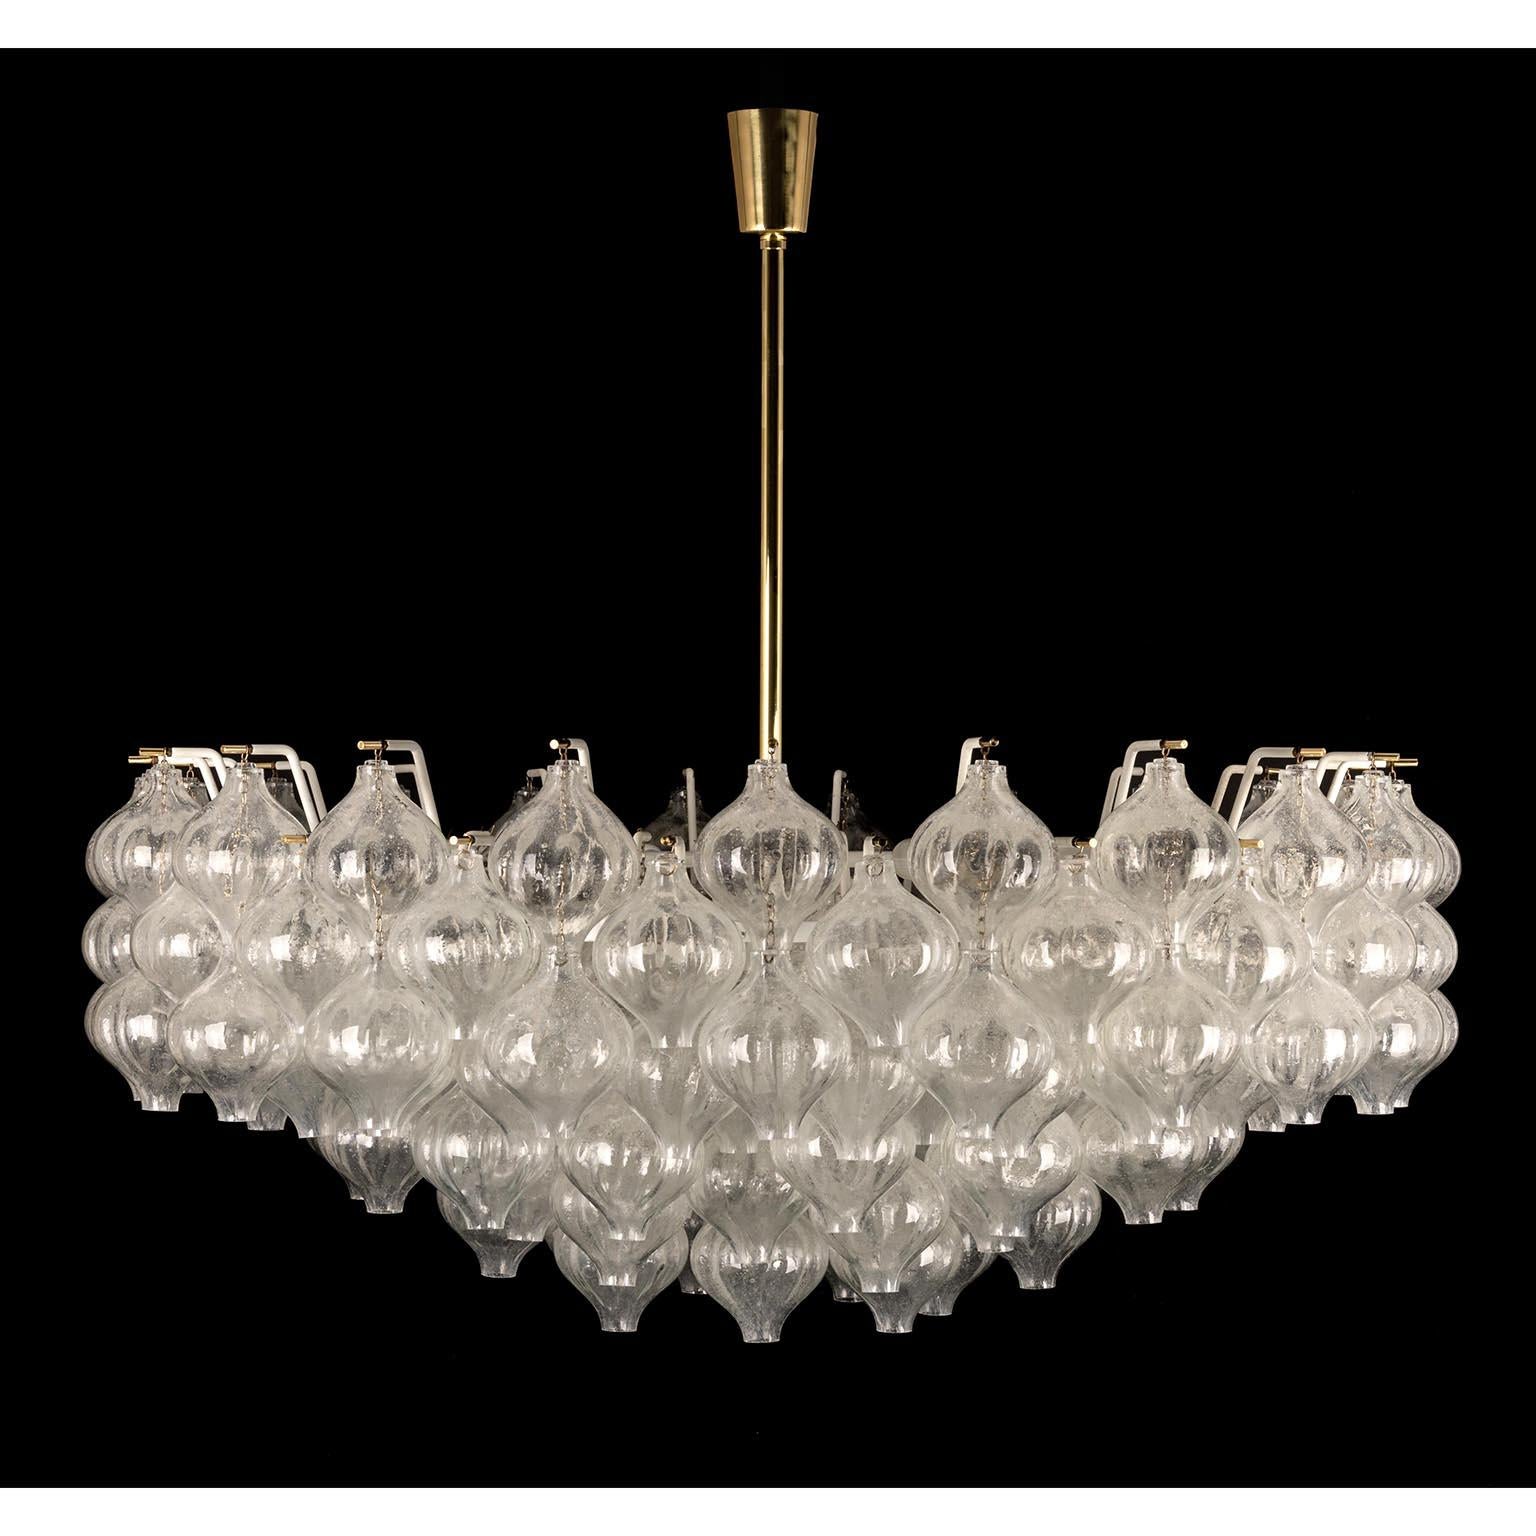 Lacquered One of Two Huge Chandeliers Kalmar 'Tulipan', Murano Glass Brass, 1970s For Sale